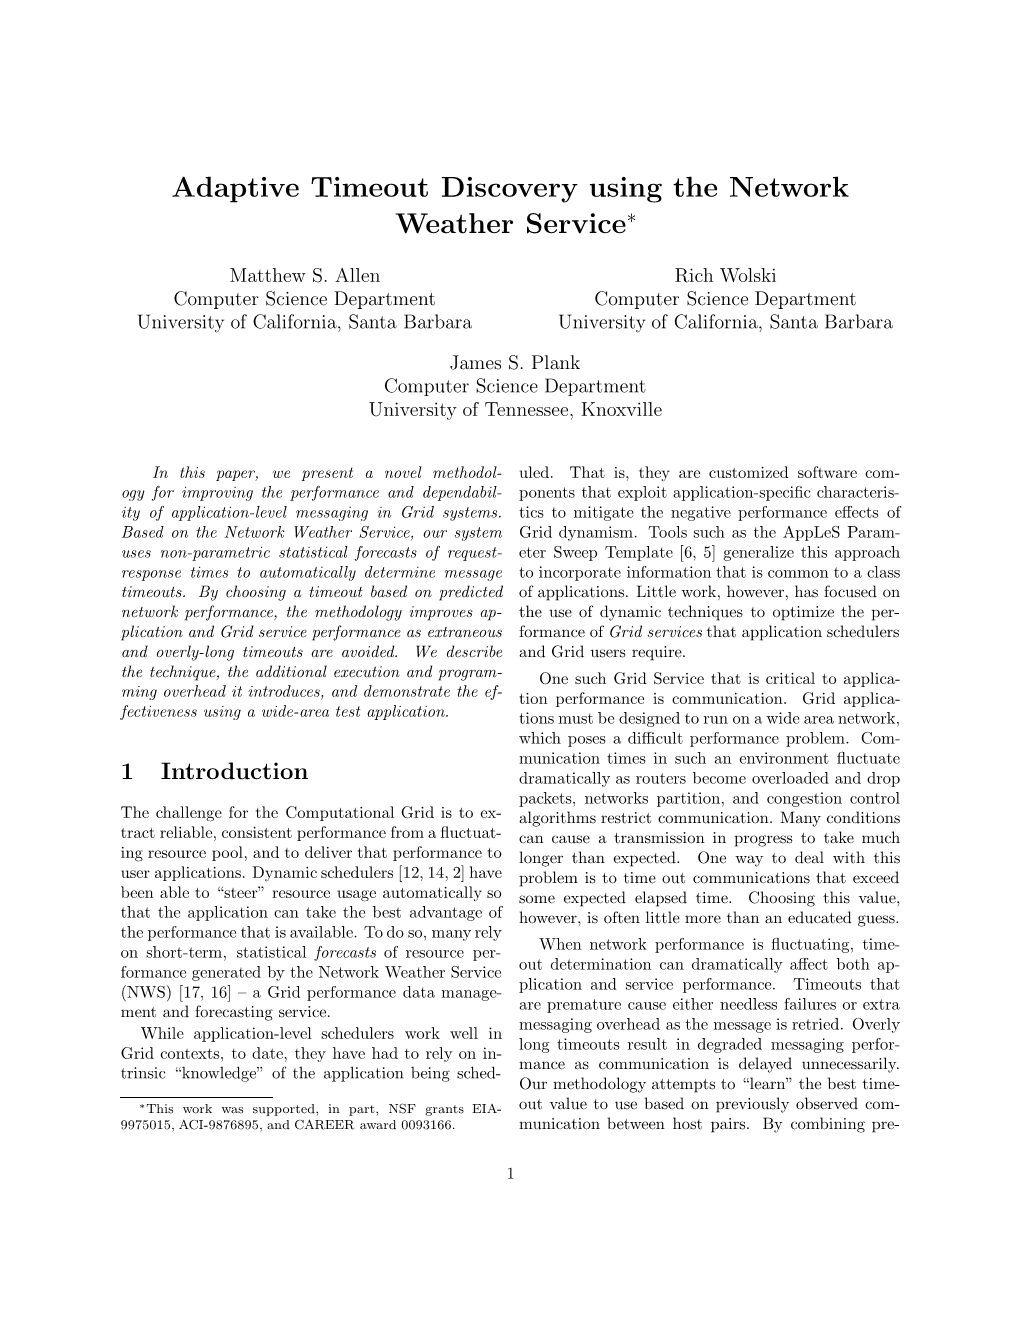 Adaptive Timeout Discovery Using the Network Weather Service∗